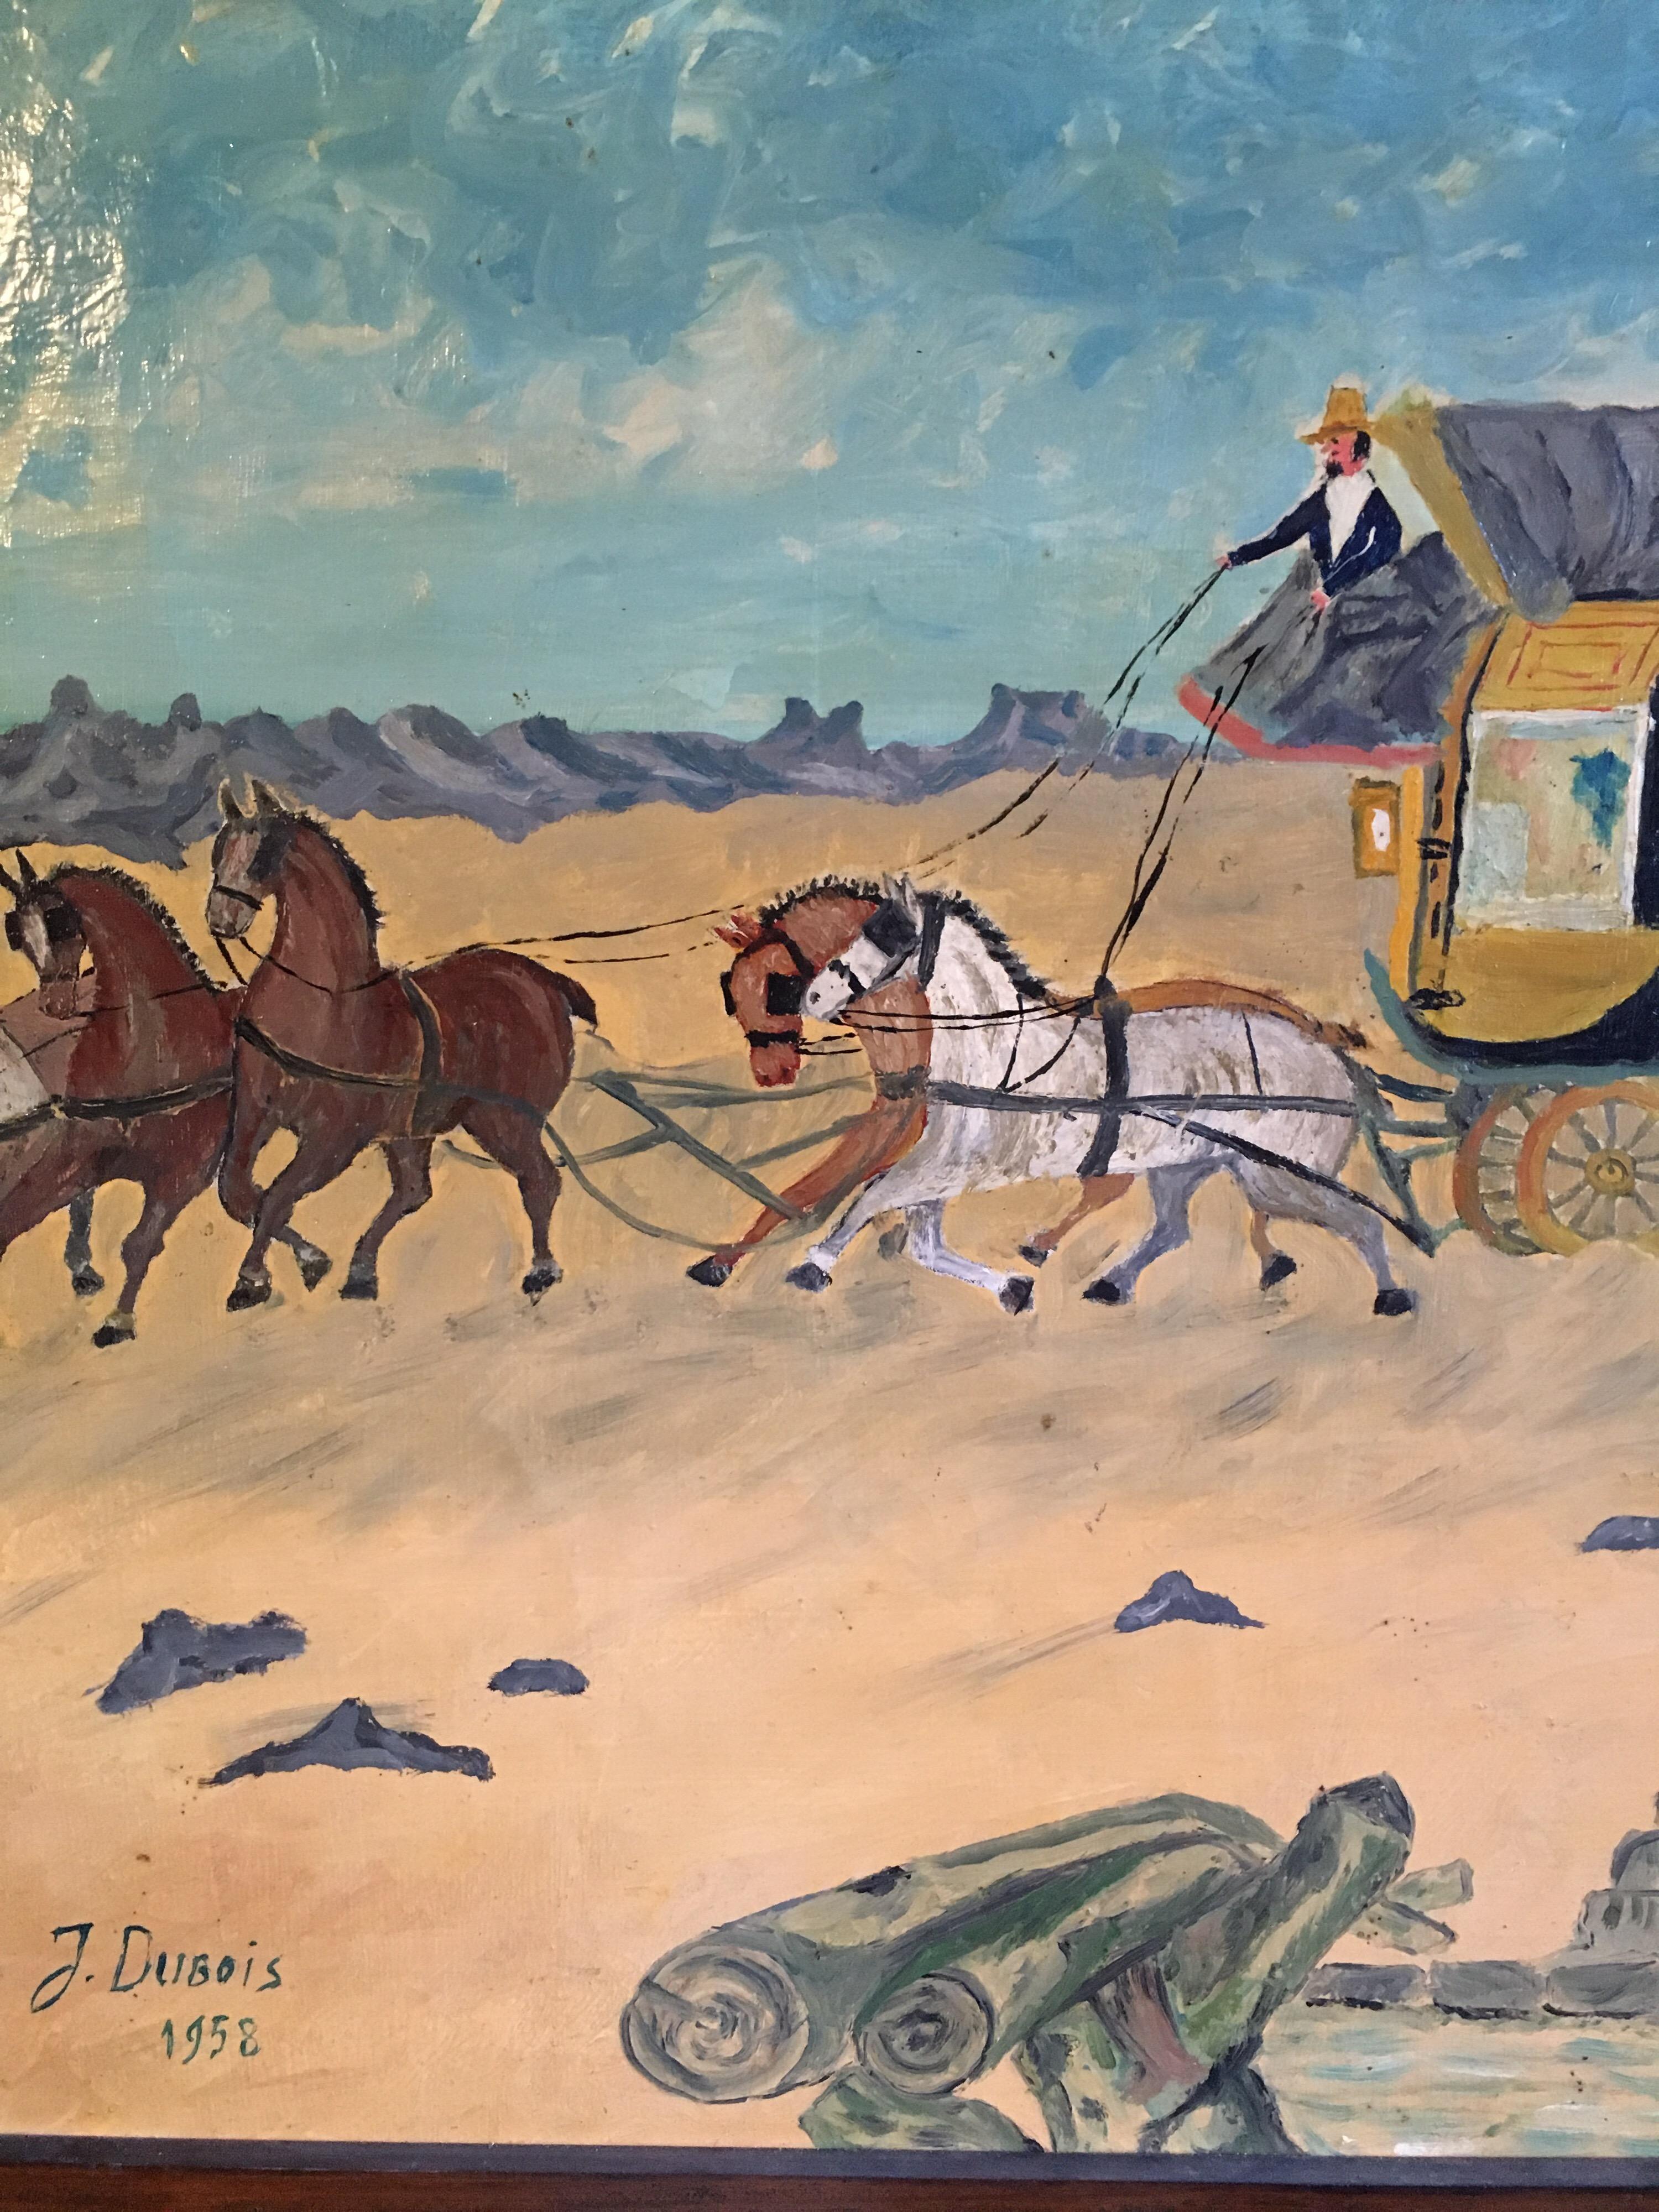 Travellers, Horse Drawn Carriage, Impressionist Oil Painting, Signed
By French artist J.Dubois, Mid 20th Century
Signed and dated '1958' by the artist on the lower left hand corner
Oil painting on canvas, framed
Framed size: 23 x 27.5